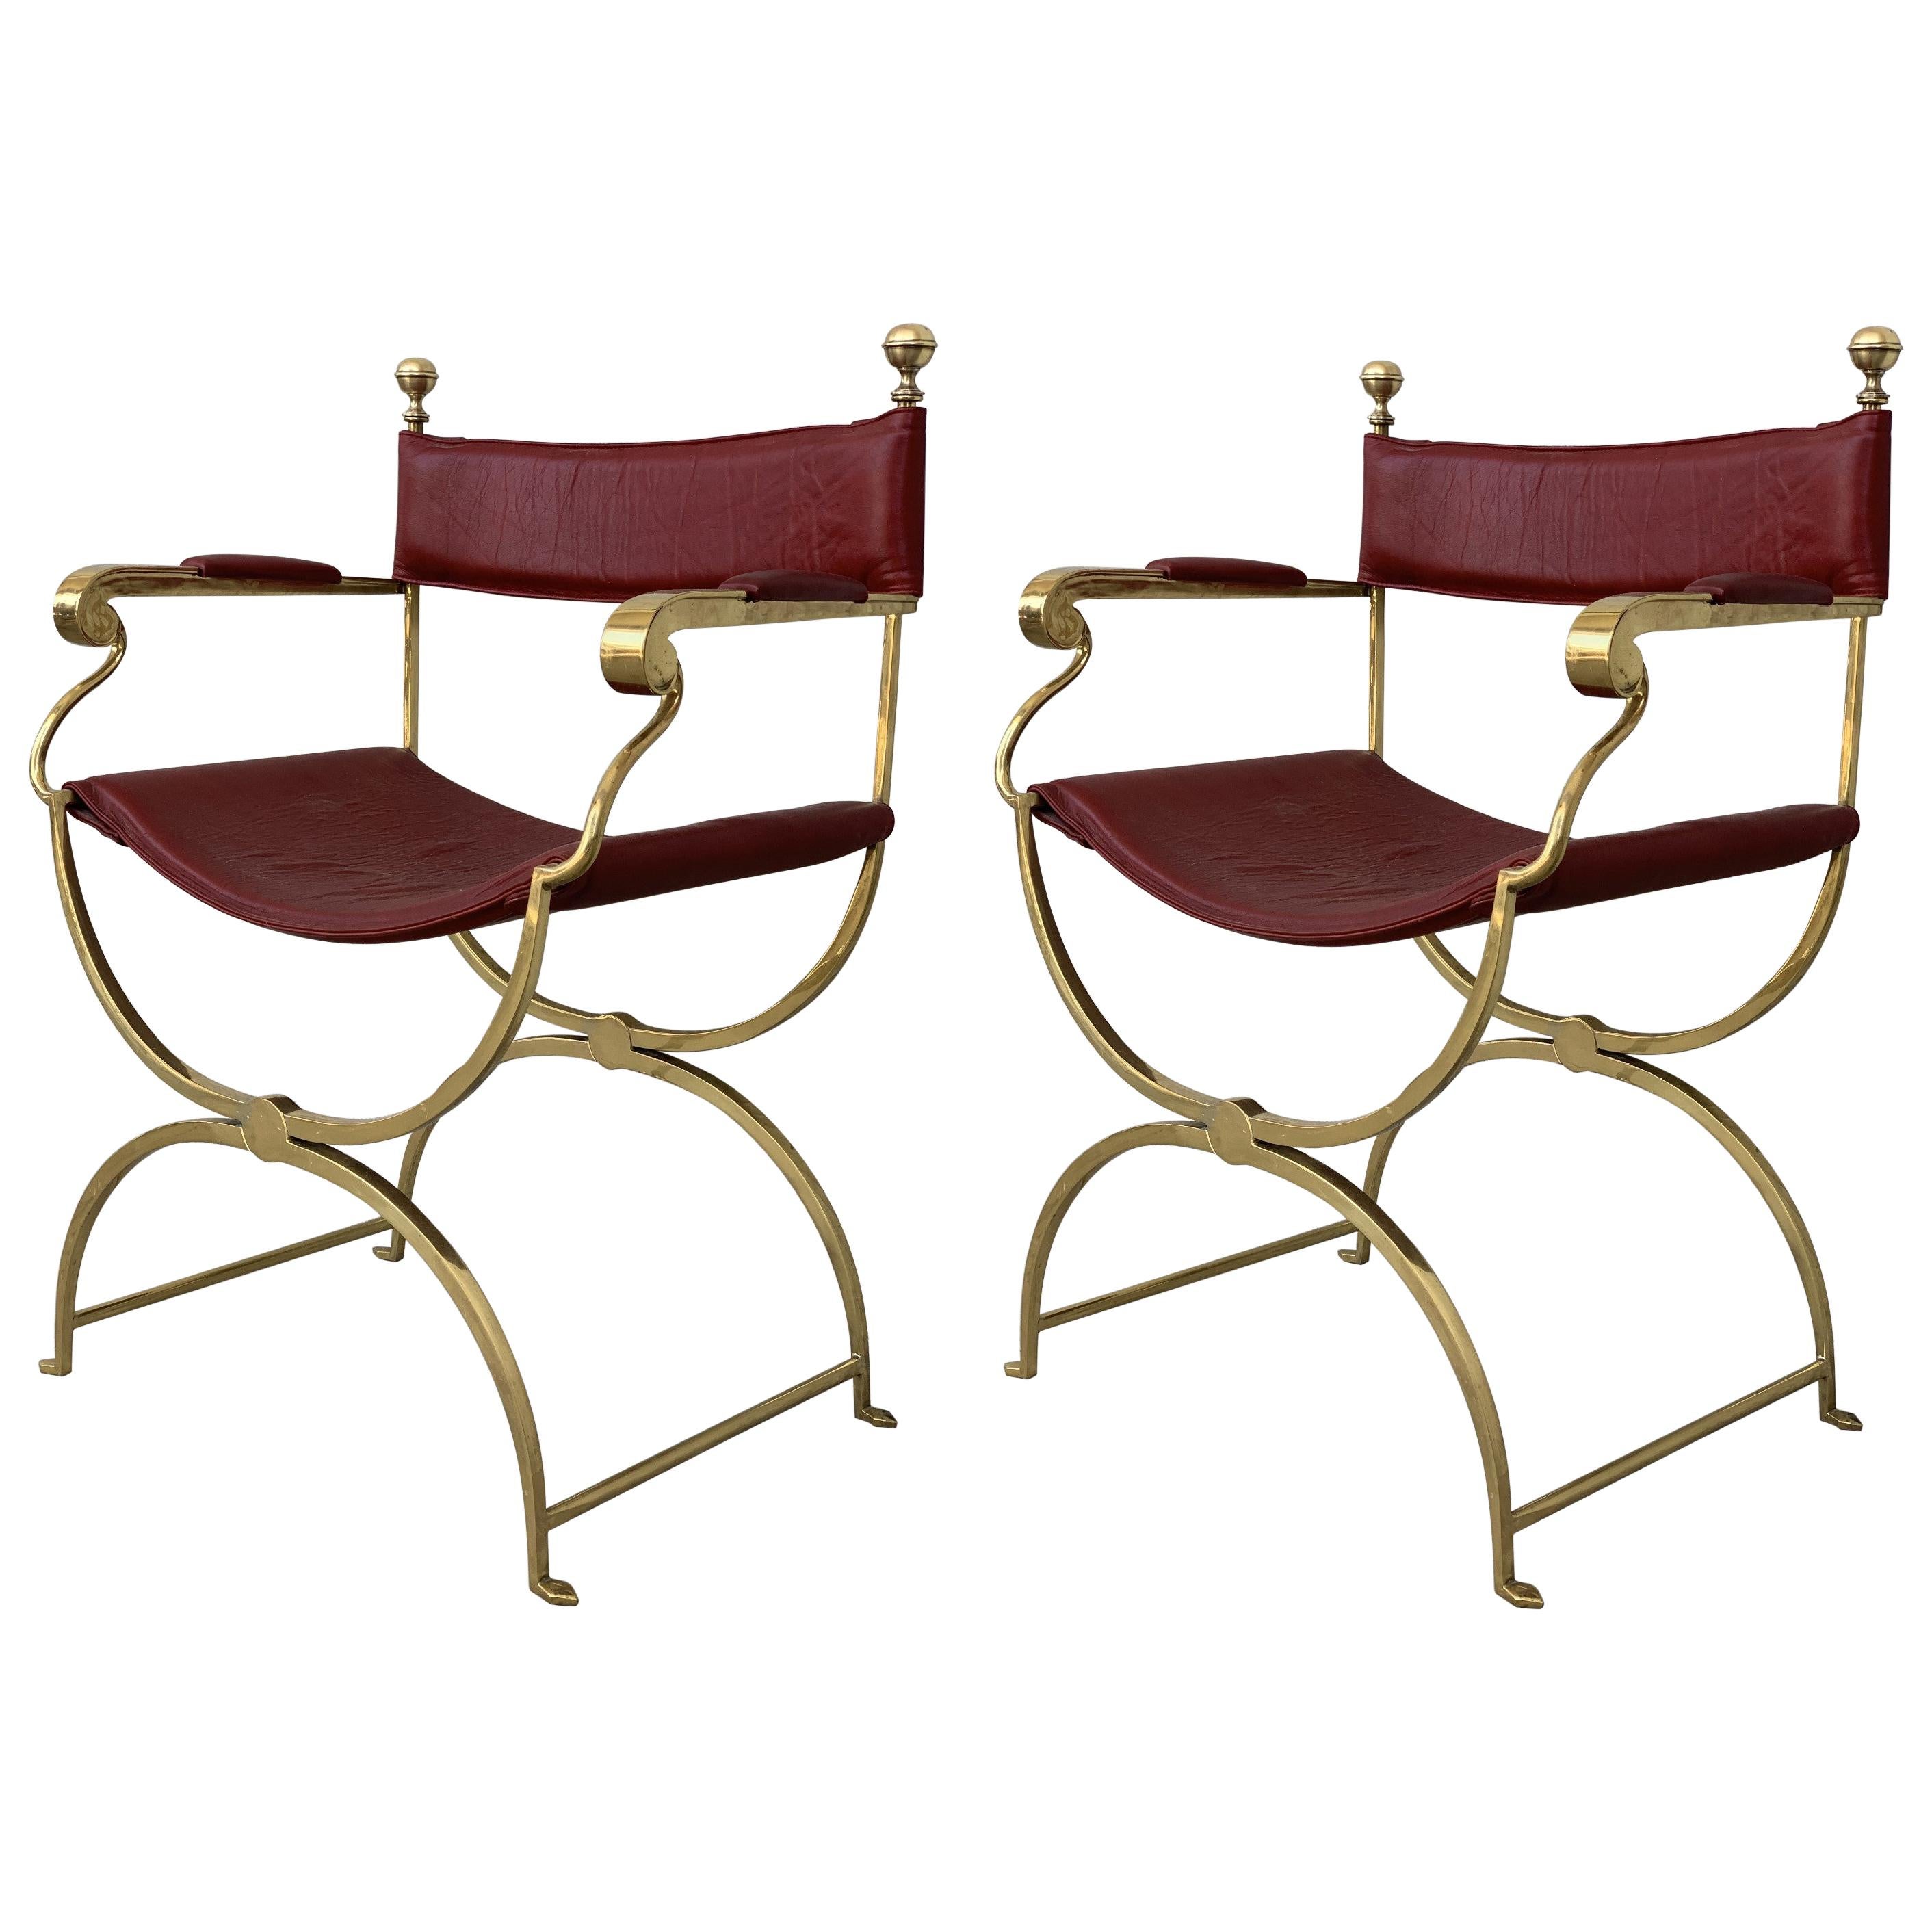 1960s Italian Hollywood Regency Chrome and Leather Savonarola Director's Chairs For Sale